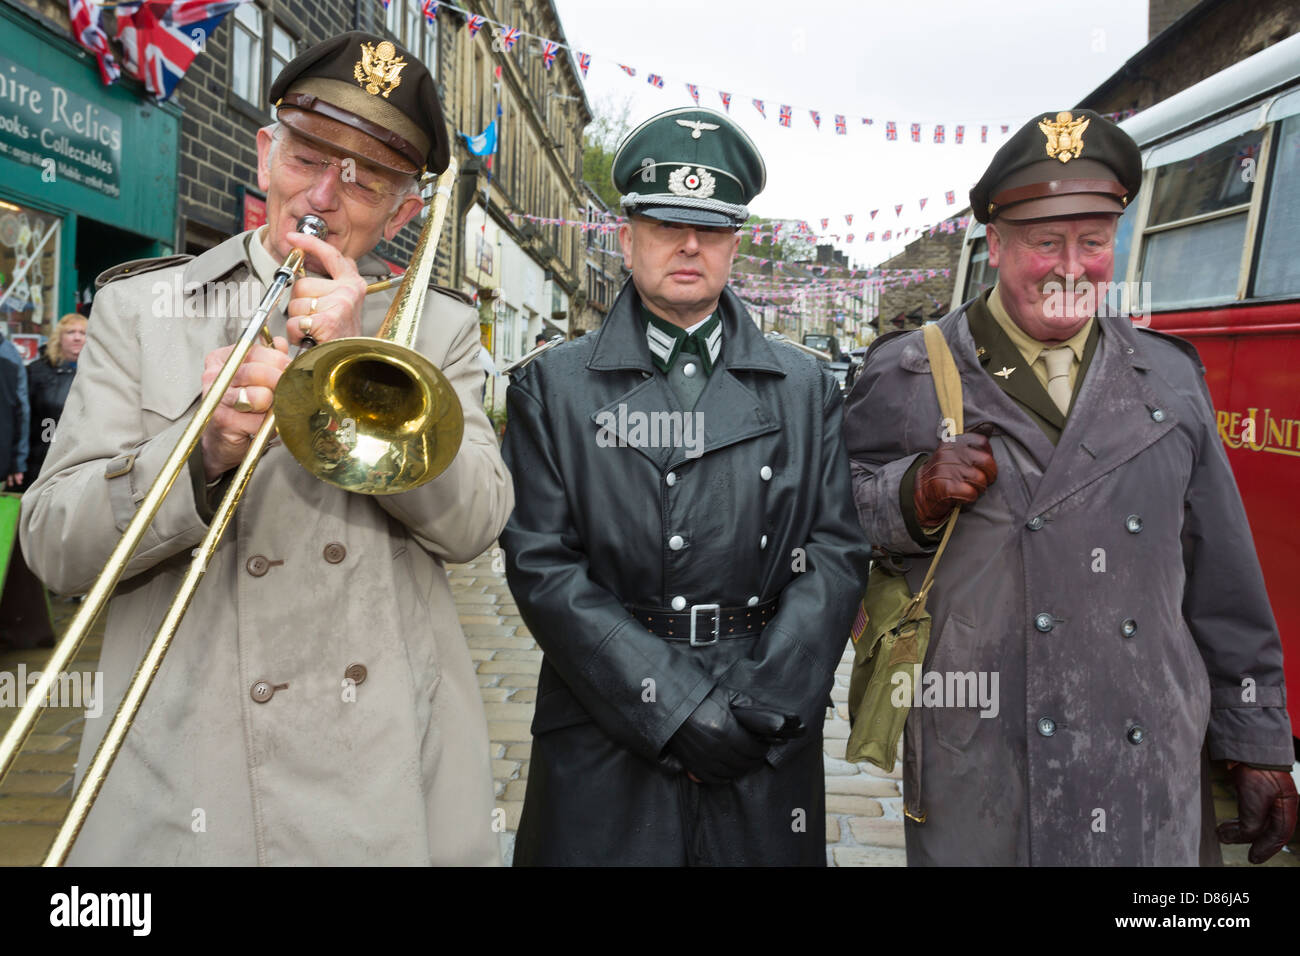 Two men in American Army uniforms, one playing a trombone, with a man in Germany Army uniform. Haworth 1940s weekend, May 2013. Stock Photo